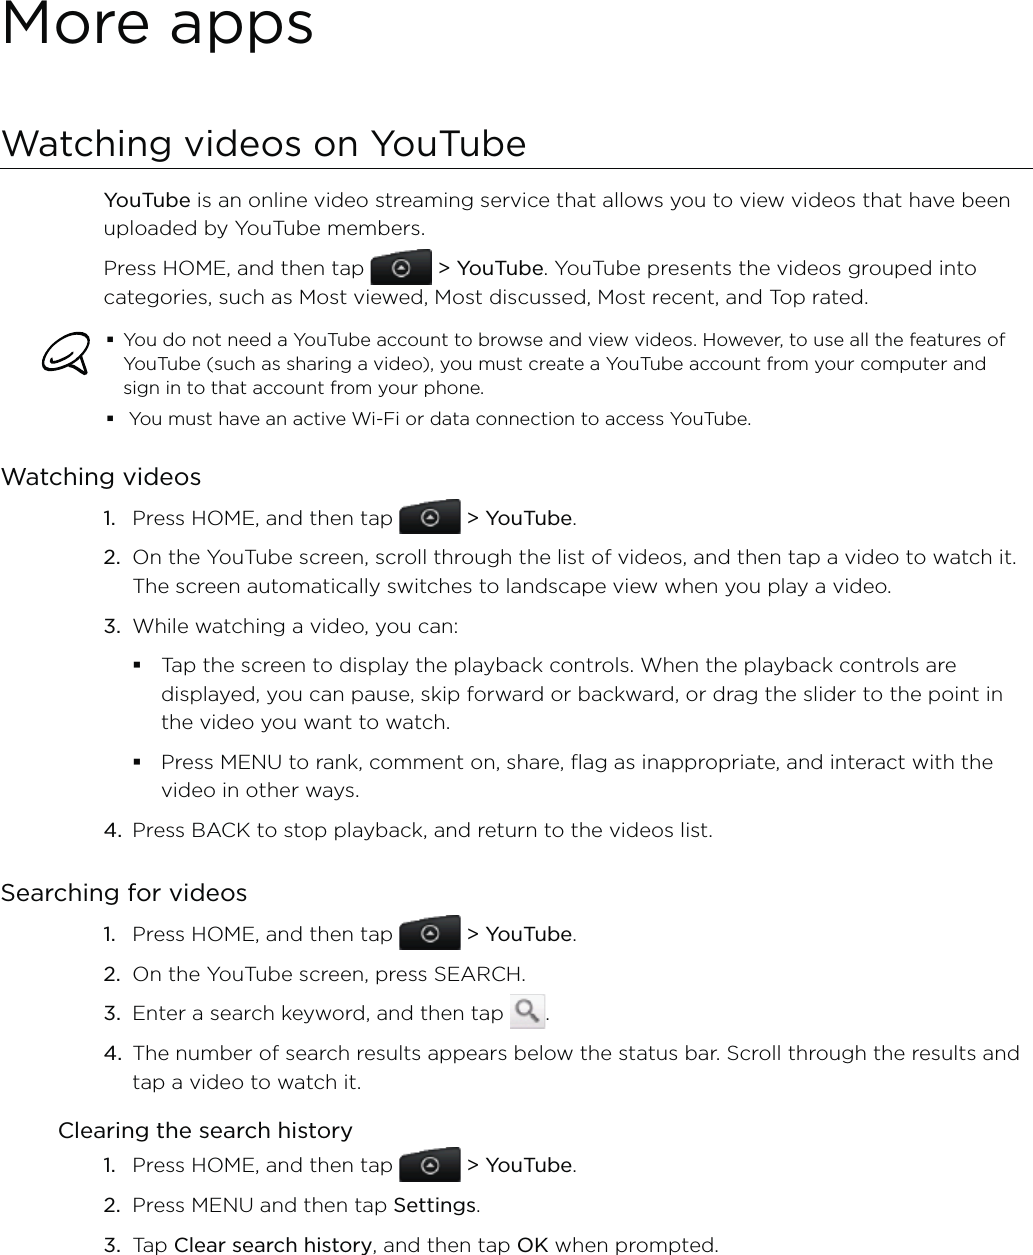 More appsWatching videos on YouTubeYouTube is an online video streaming service that allows you to view videos that have been uploaded by YouTube members.Press HOME, and then tap   &gt; YouTube. YouTube presents the videos grouped into categories, such as Most viewed, Most discussed, Most recent, and Top rated.You do not need a YouTube account to browse and view videos. However, to use all the features of YouTube (such as sharing a video), you must create a YouTube account from your computer and sign in to that account from your phone. You must have an active Wi-Fi or data connection to access YouTube.Watching videosPress HOME, and then tap   &gt; YouTube.On the YouTube screen, scroll through the list of videos, and then tap a video to watch it. The screen automatically switches to landscape view when you play a video.While watching a video, you can: Tap the screen to display the playback controls. When the playback controls are displayed, you can pause, skip forward or backward, or drag the slider to the point in the video you want to watch.Press MENU to rank, comment on, share, flag as inappropriate, and interact with the video in other ways.4.  Press BACK to stop playback, and return to the videos list.Searching for videosPress HOME, and then tap   &gt; YouTube. On the YouTube screen, press SEARCH.Enter a search keyword, and then tap  .The number of search results appears below the status bar. Scroll through the results and tap a video to watch it.Clearing the search historyPress HOME, and then tap   &gt; YouTube.Press MENU and then tap Settings. Tap Clear search history, and then tap OK when prompted.1.2.3.1.2.3.4.1.2.3.